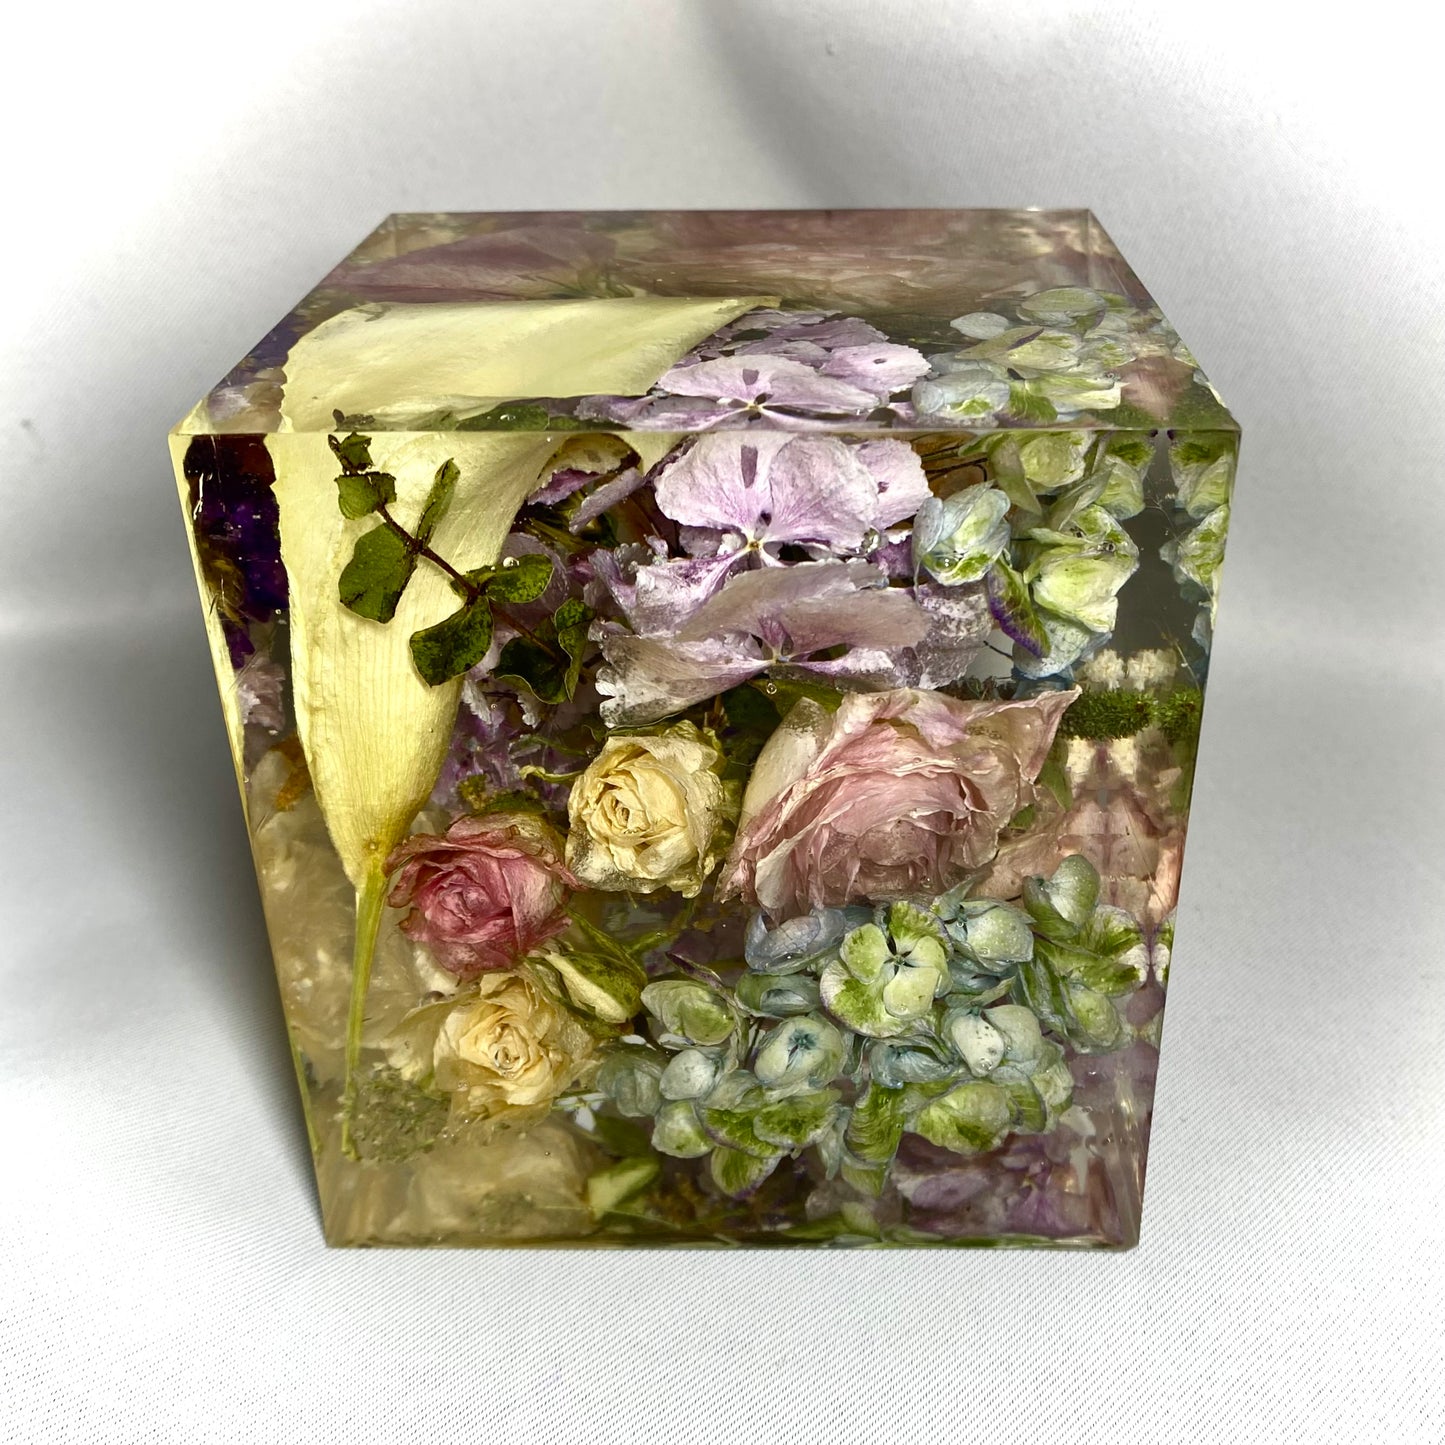 Mixed Floral 10cm cube